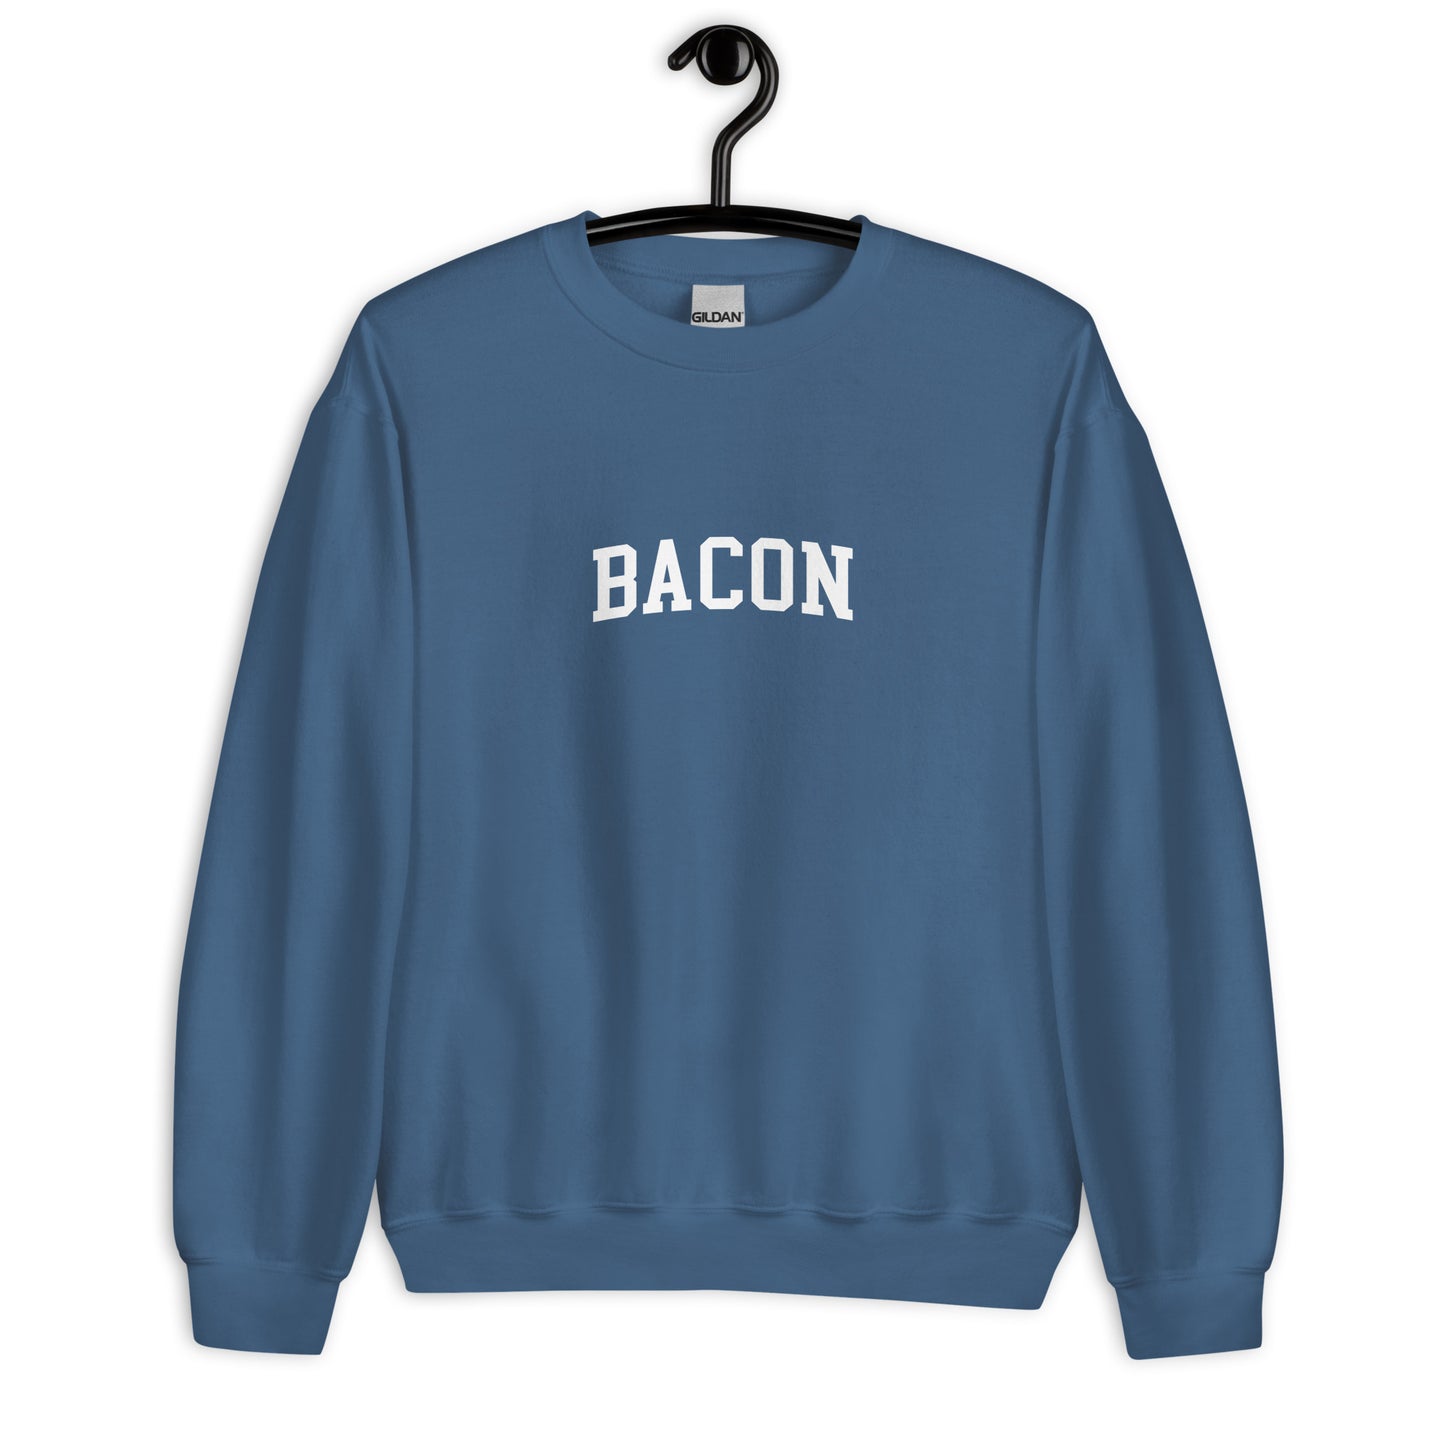 Bacon Sweatshirt - Arched Font